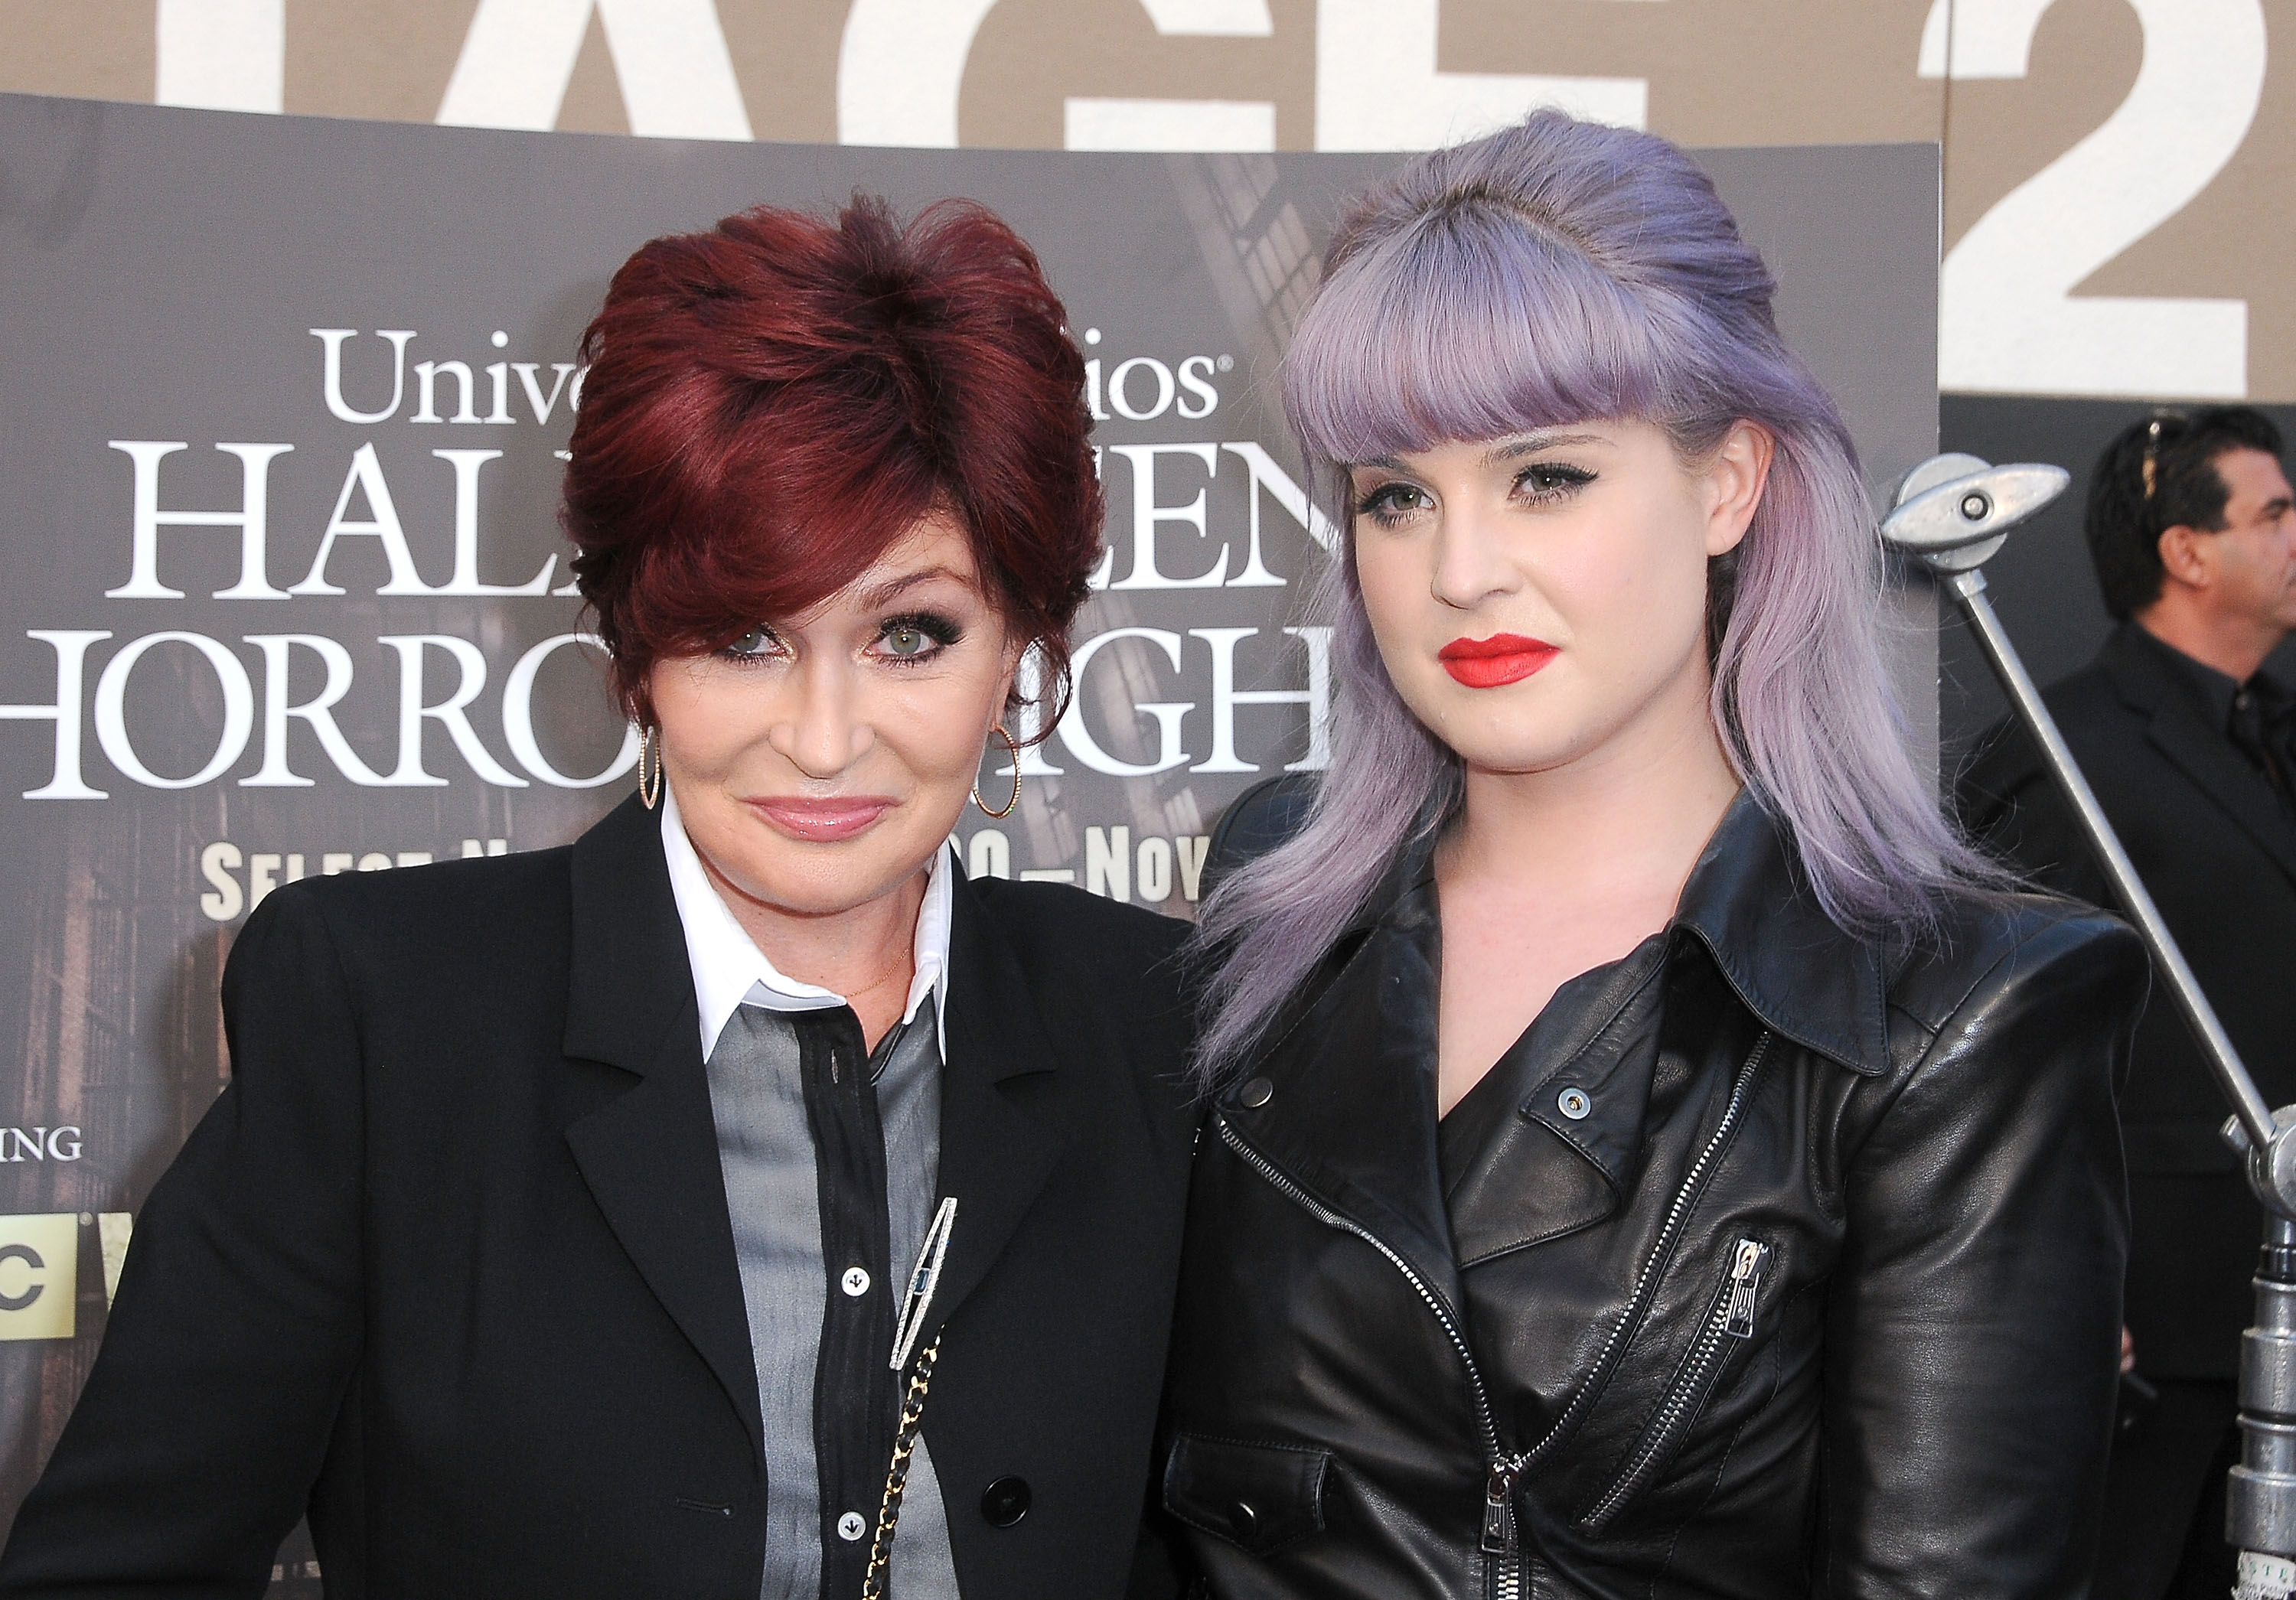 Sharon Osbourne and Kelly Osbourne attend the Universal Studios "Halloween Horror Nights" Opening Night and Eyegore Awards on September 20, 2013, in Universal City, California. | Source: Getty Images